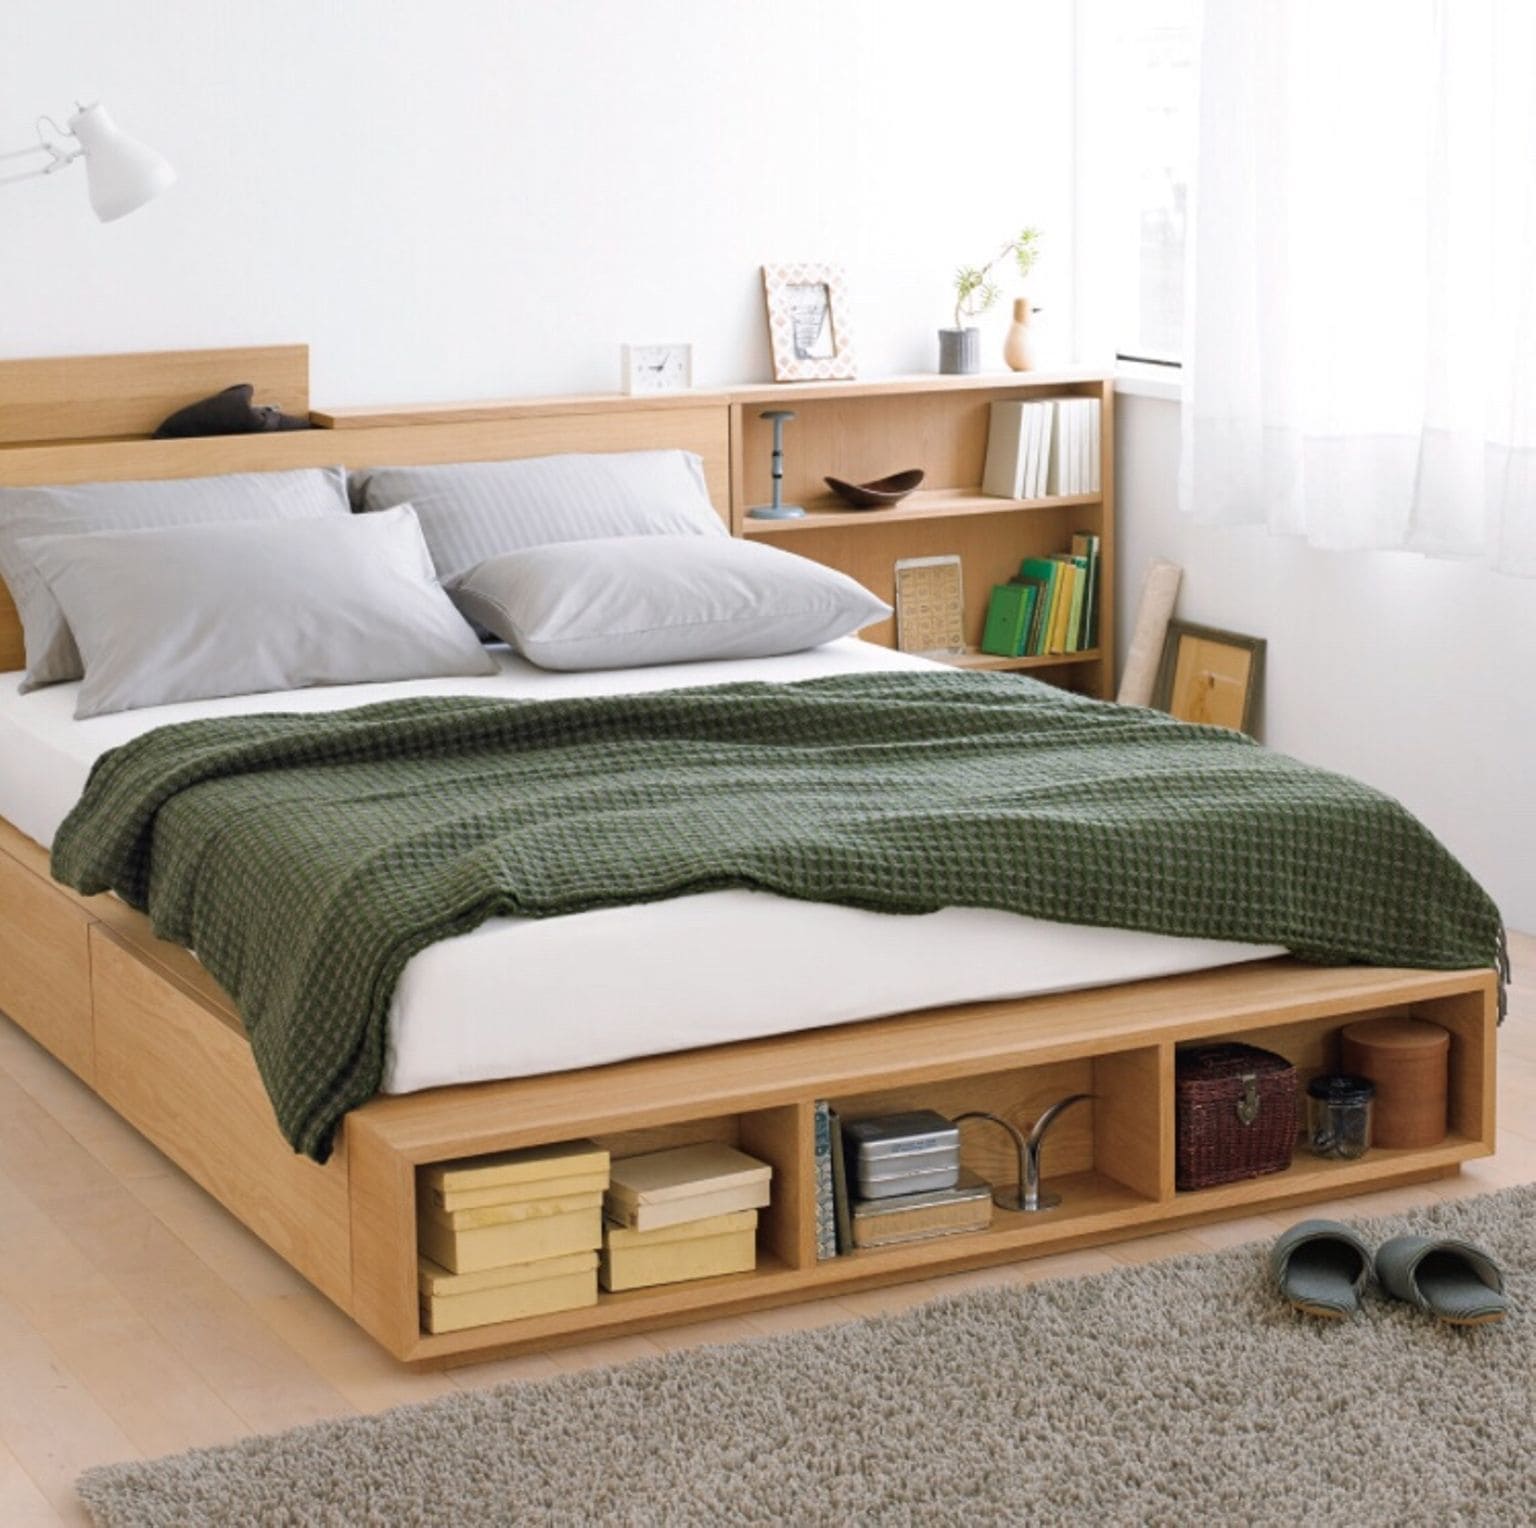 23 creative storage bed ideas to add to your bag - 171